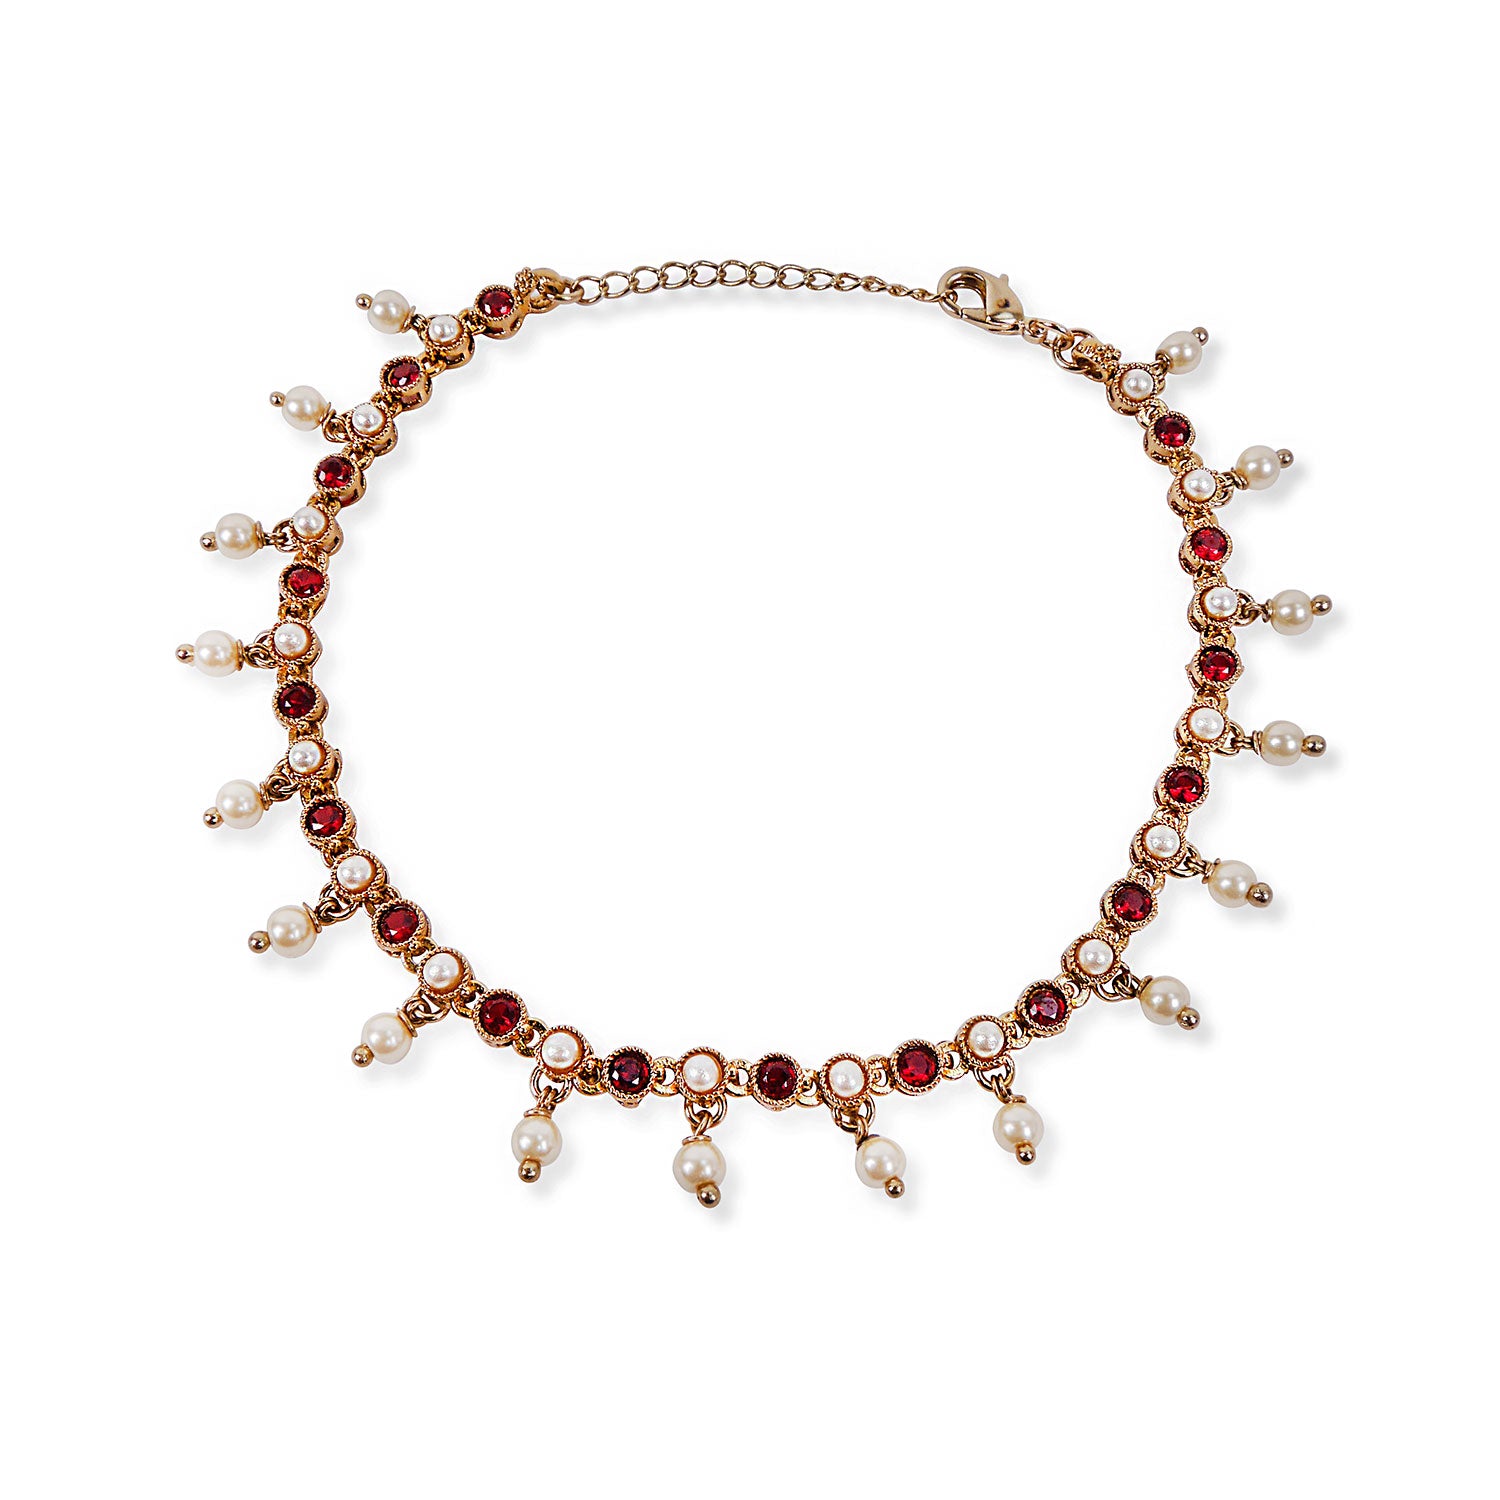 Malika Anklet in Maroon and Pearl